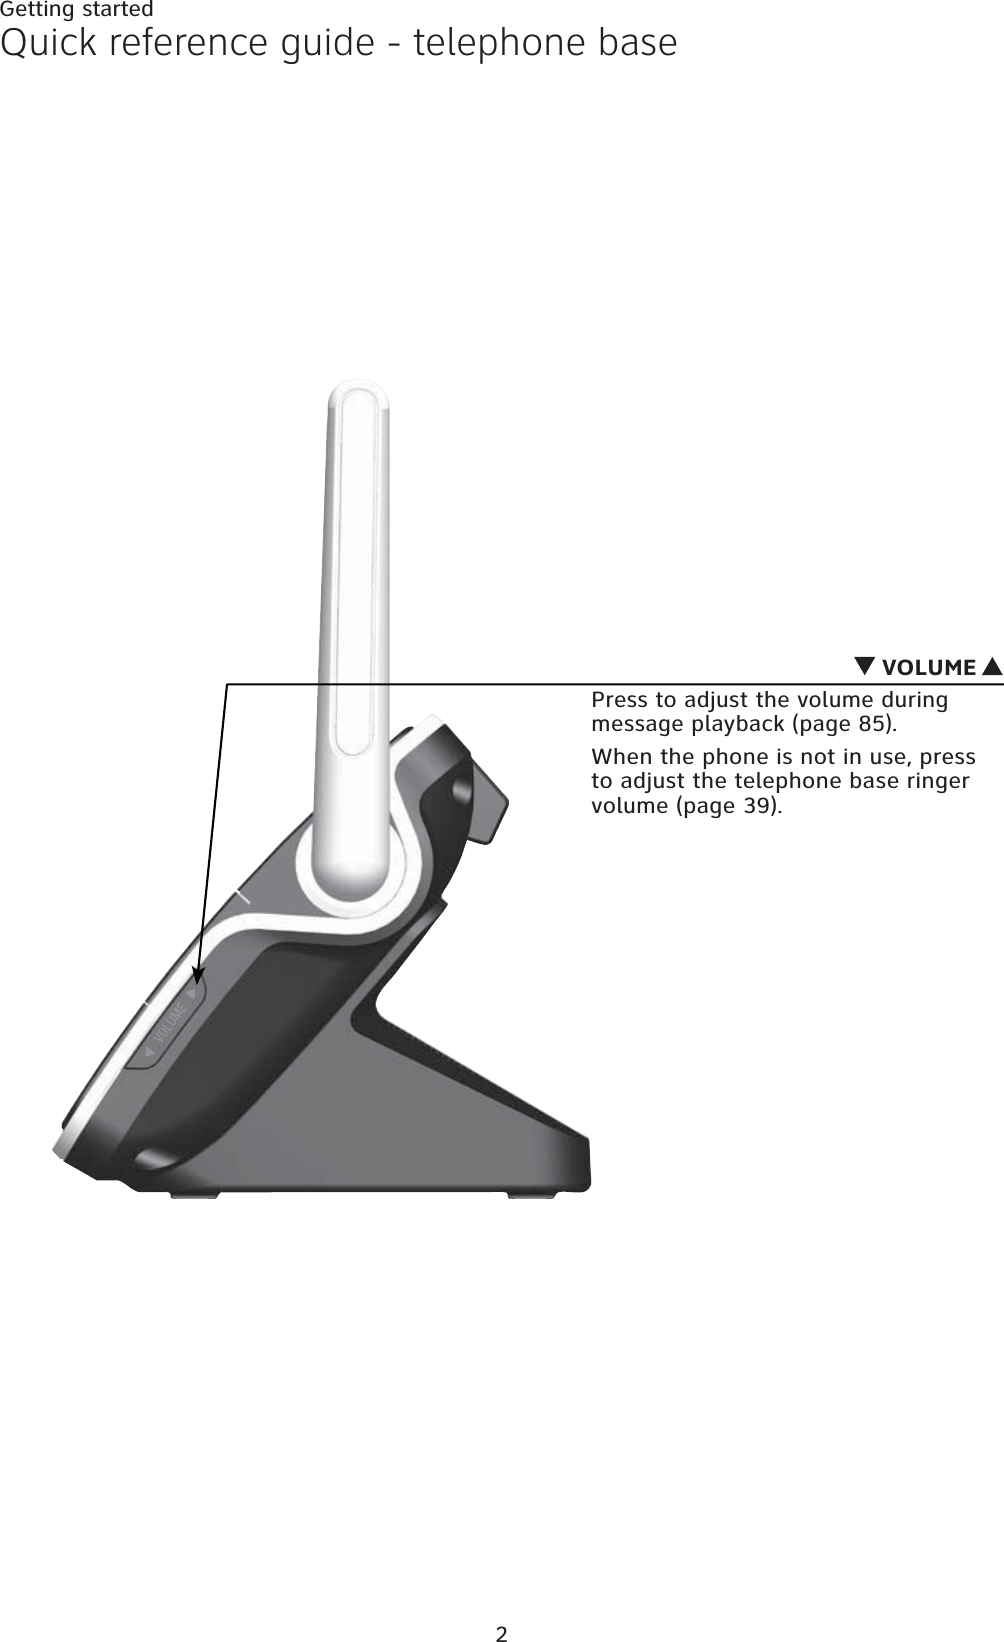 2Getting startedQuick reference guide - telephone base VOLUME Press to adjust the volume during message playback (page 85).When the phone is not in use, press to adjust the telephone base ringer volume (page 39).